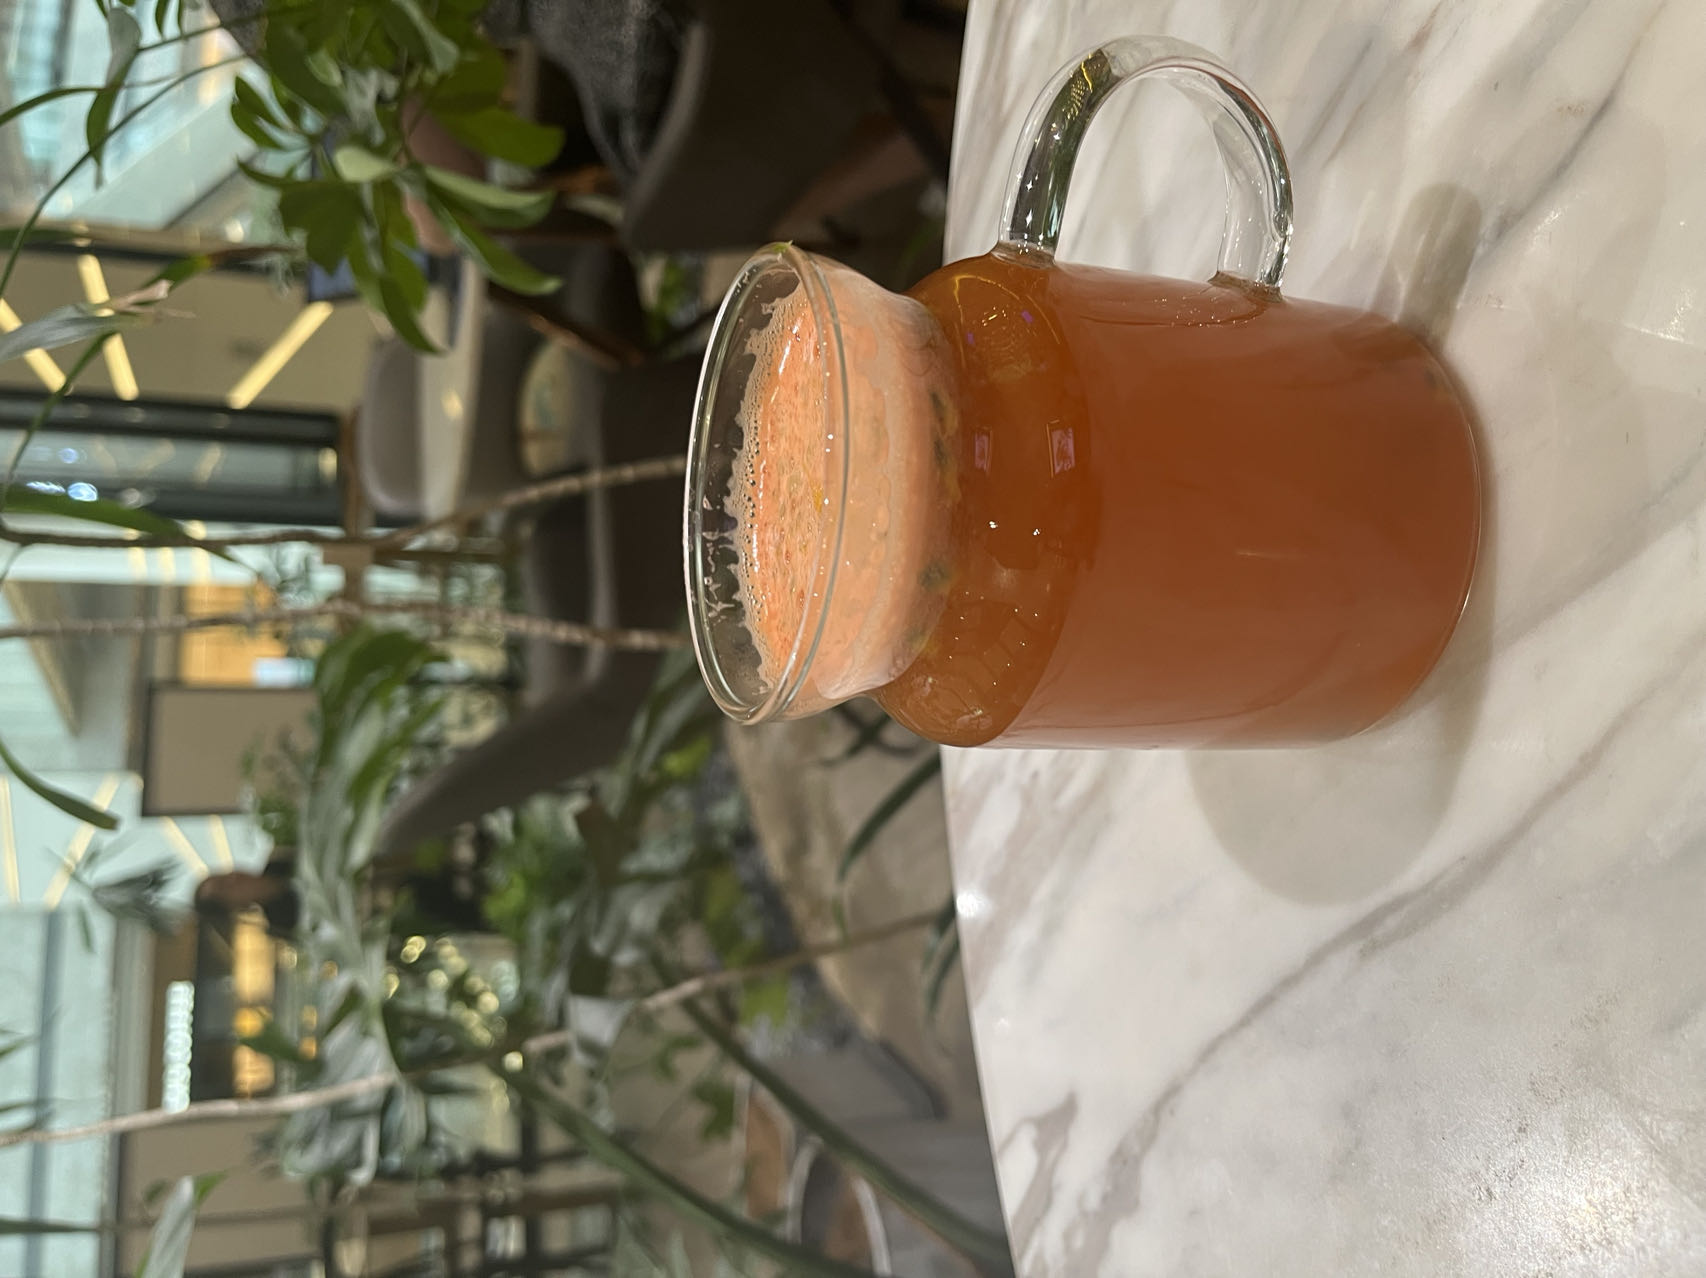 A passion fruit rooibos drink is served at theATRE Cafe. /CGTN